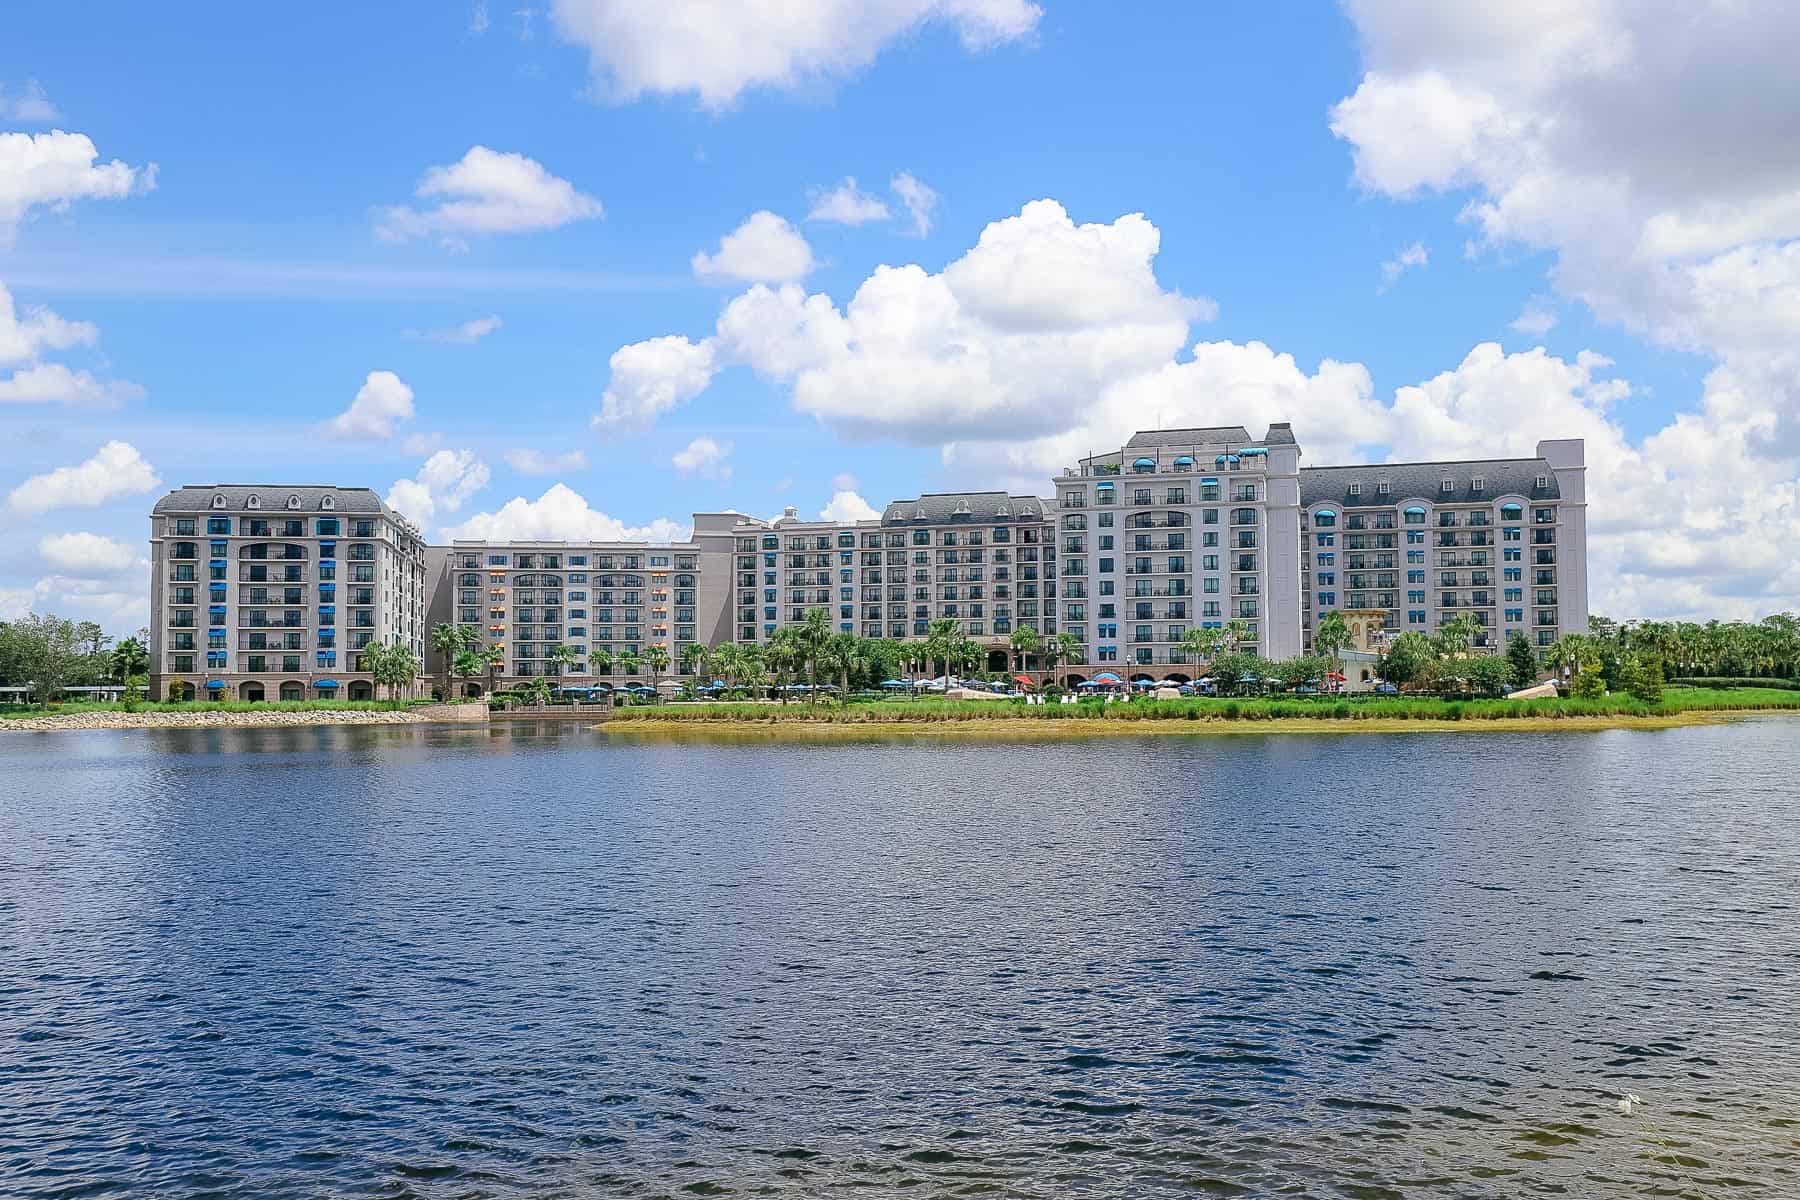 Disney's Riviera as it sits on the lake of Barefoot Bay 